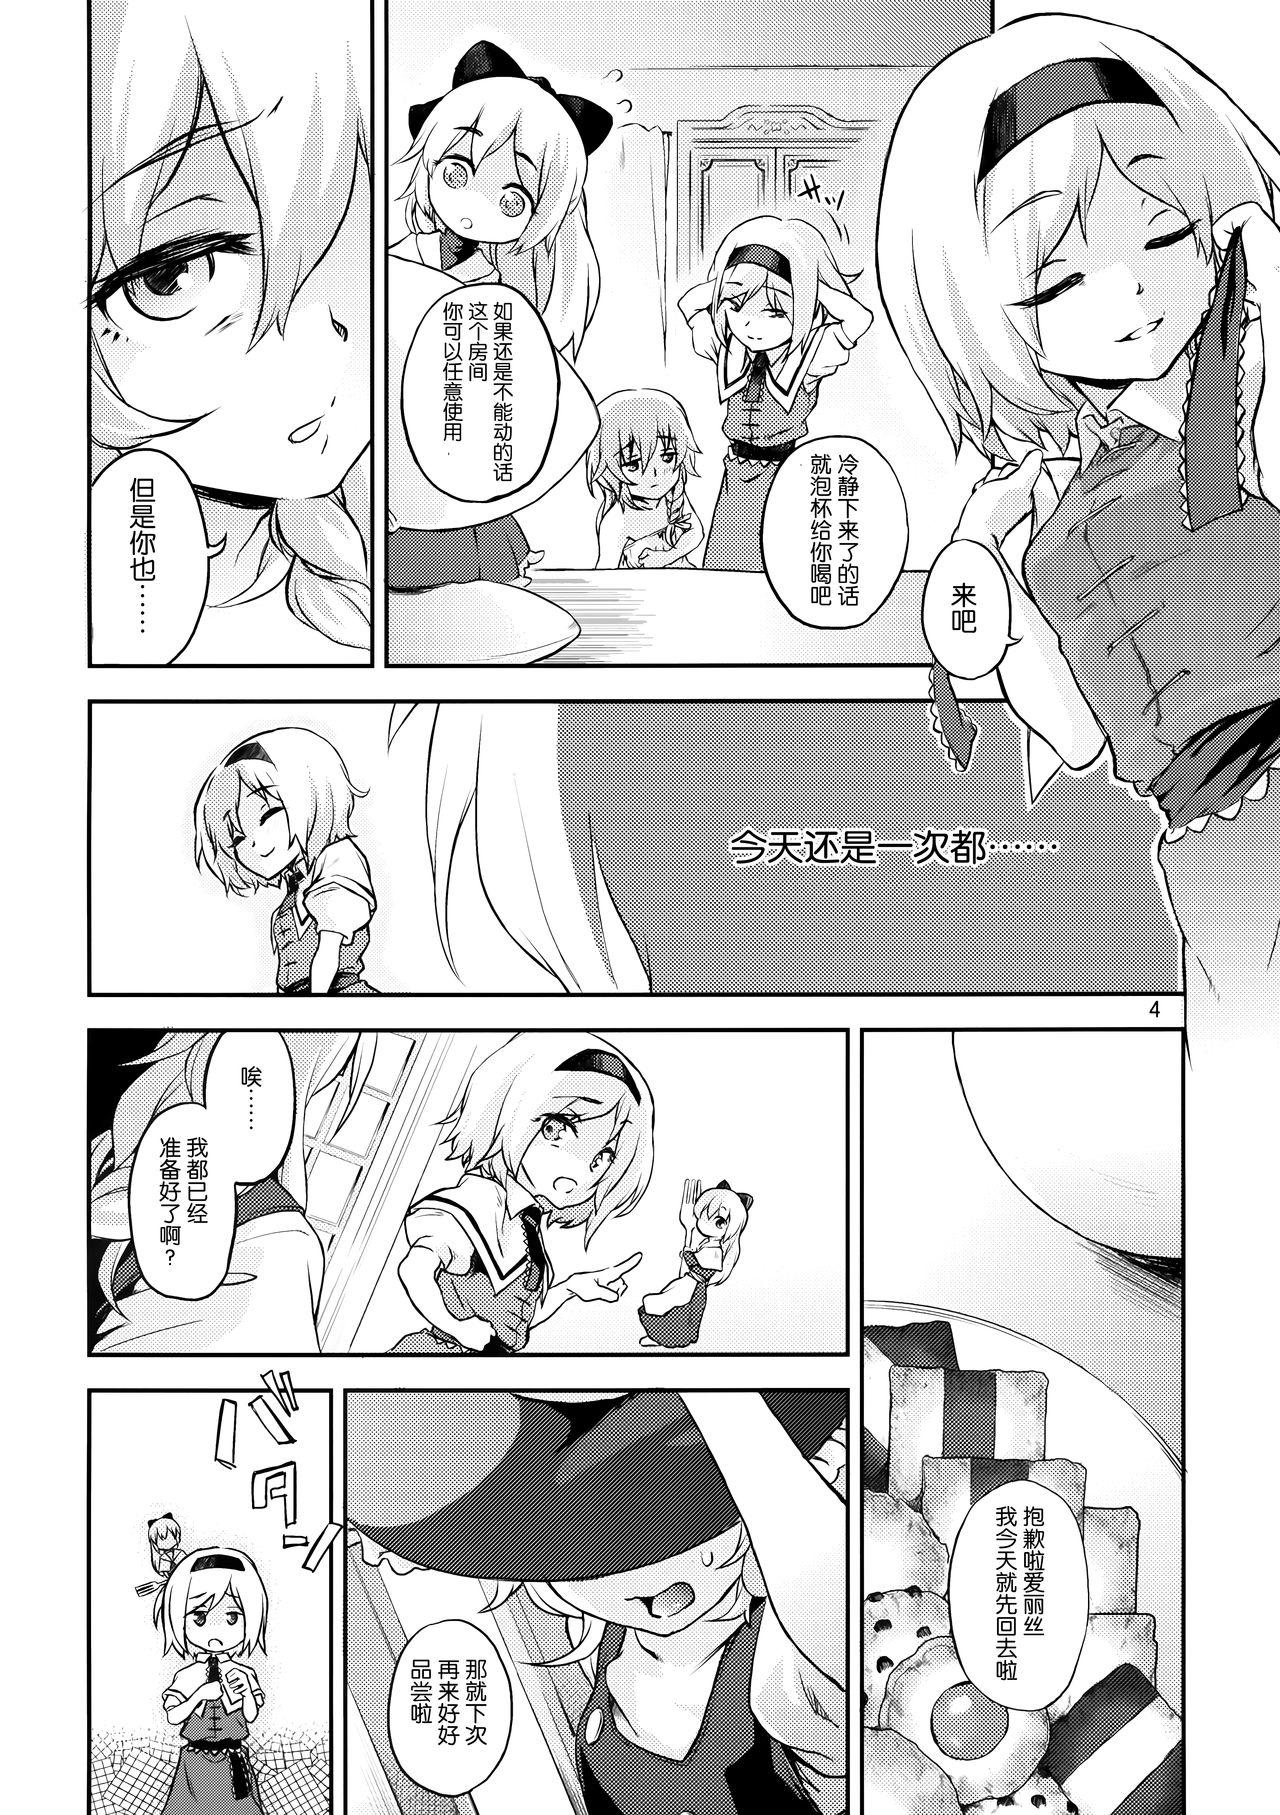 All Natural Touhou Terebi-san 4 - Touhou project Eating Pussy - Page 4